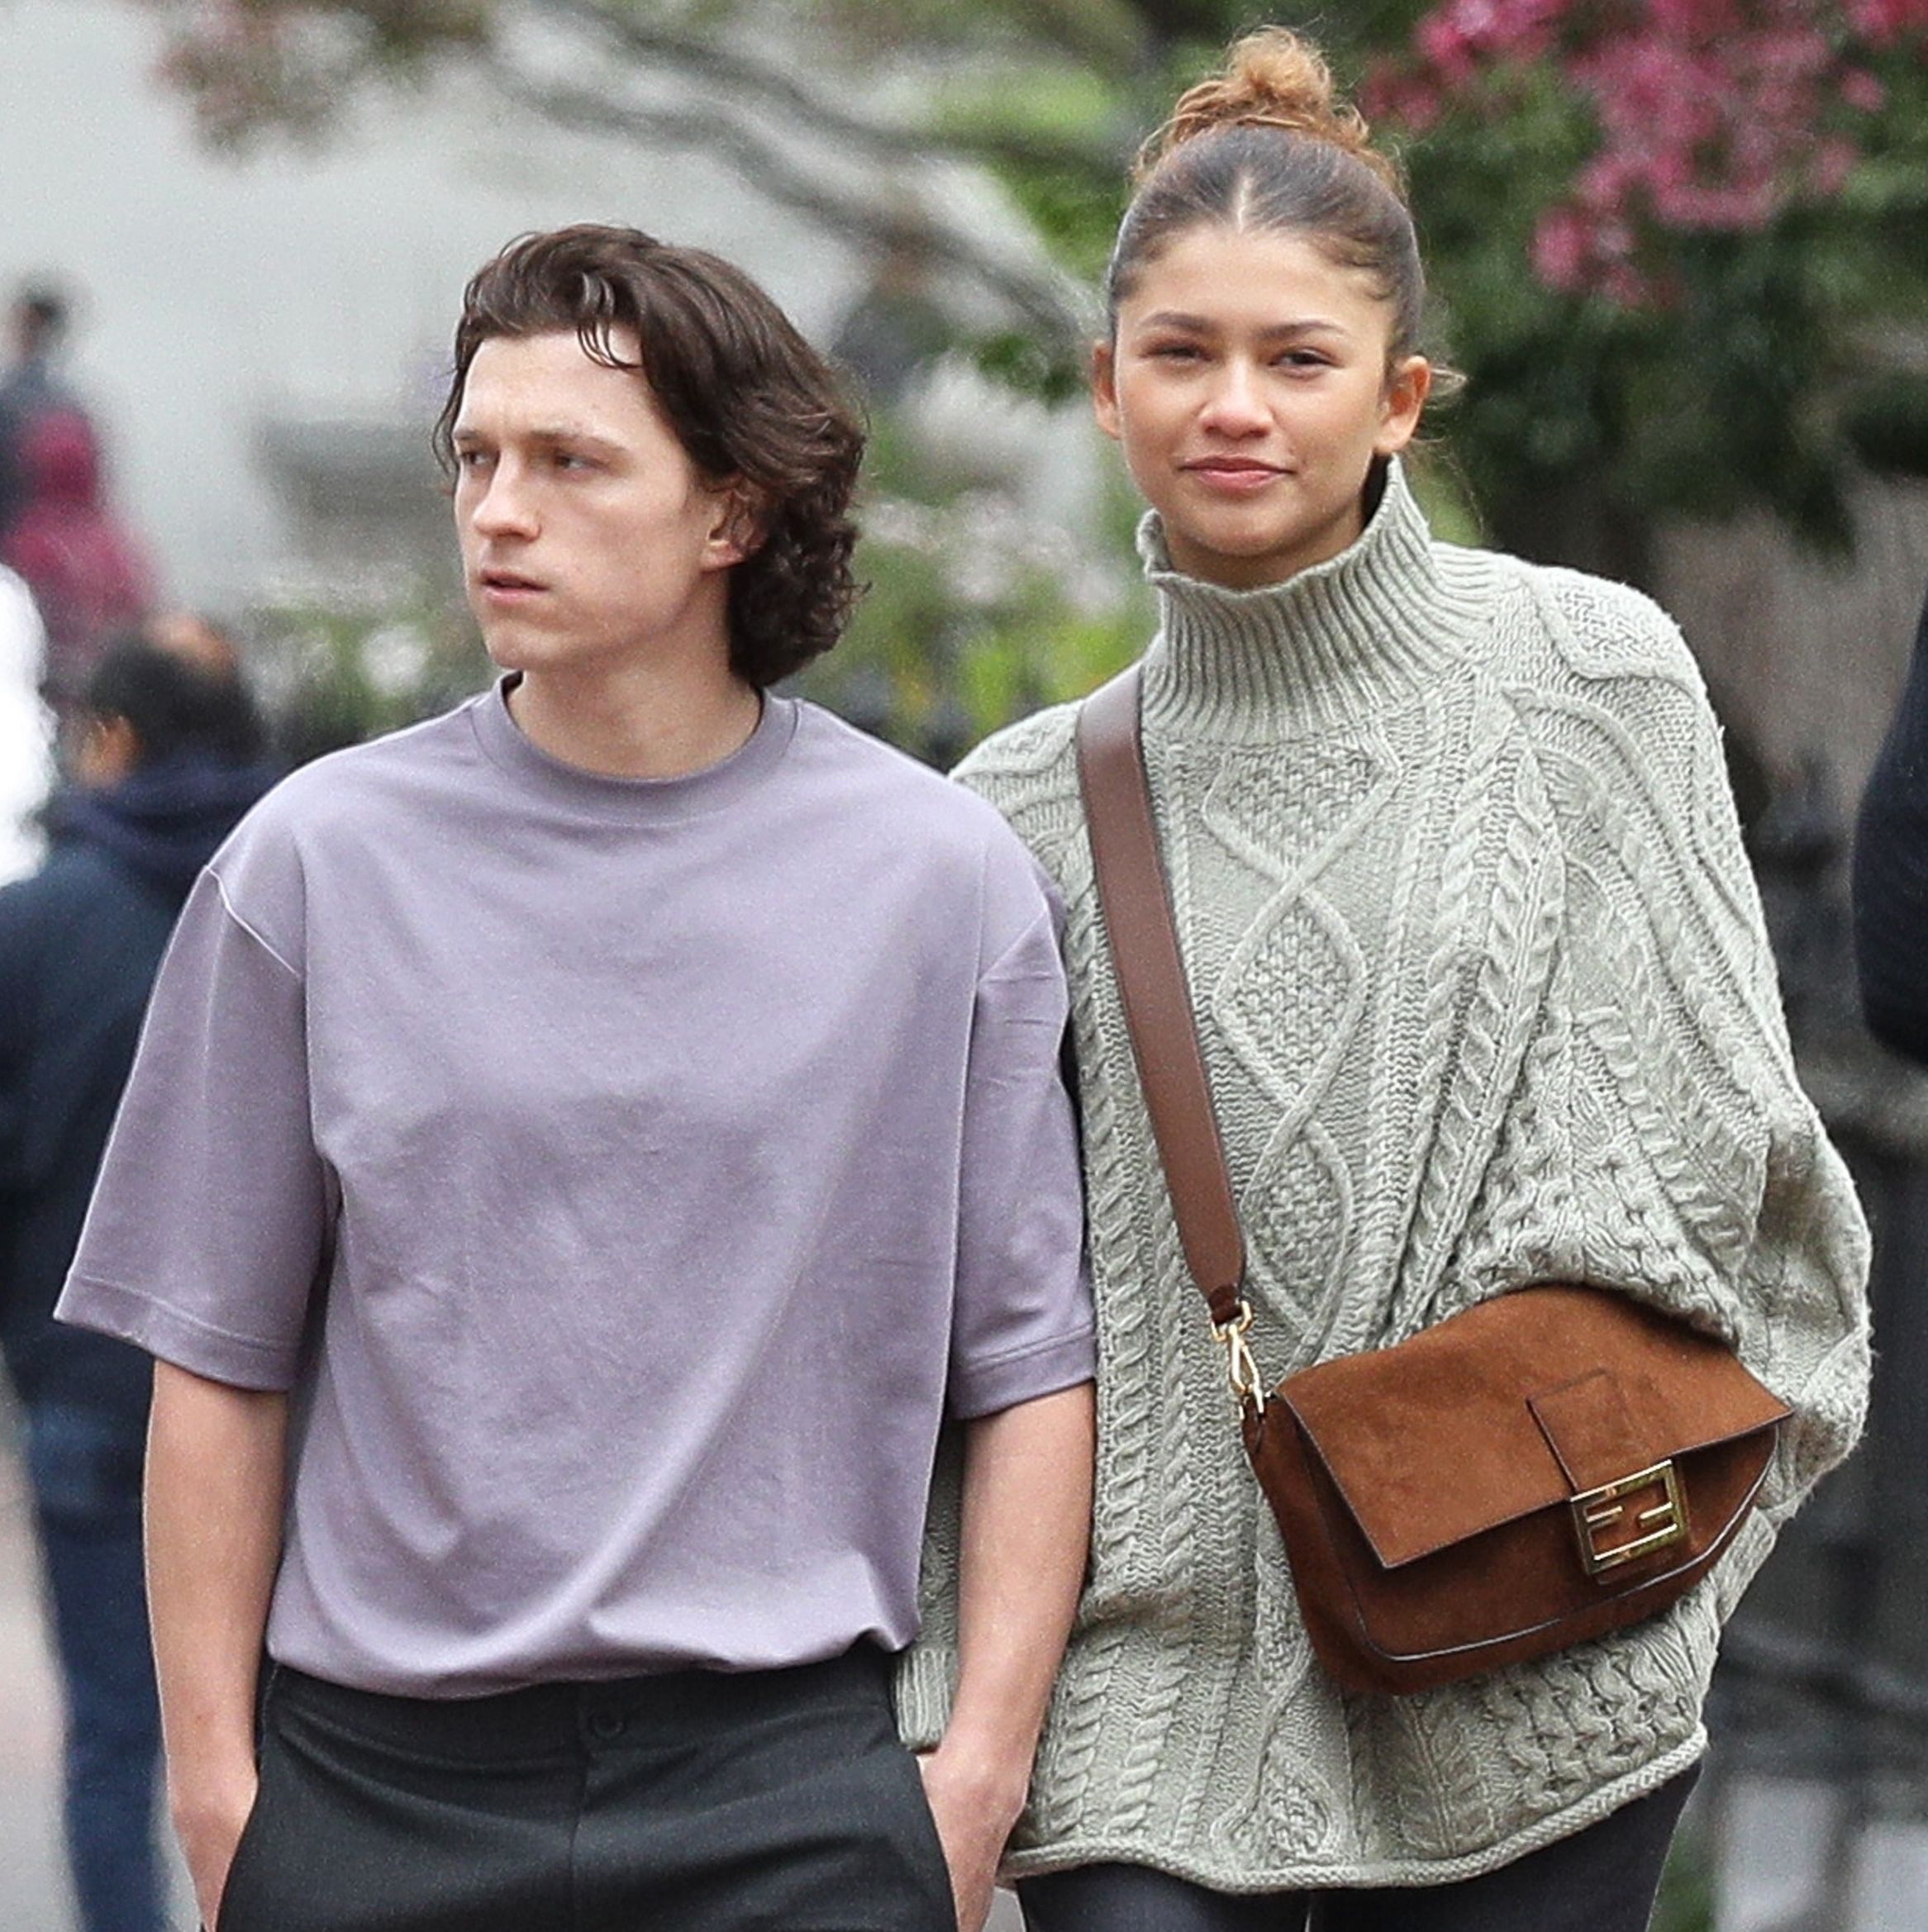 Zendaya and Tom Holland Held Hands in His Pocket During Cute Boston Shopping Date